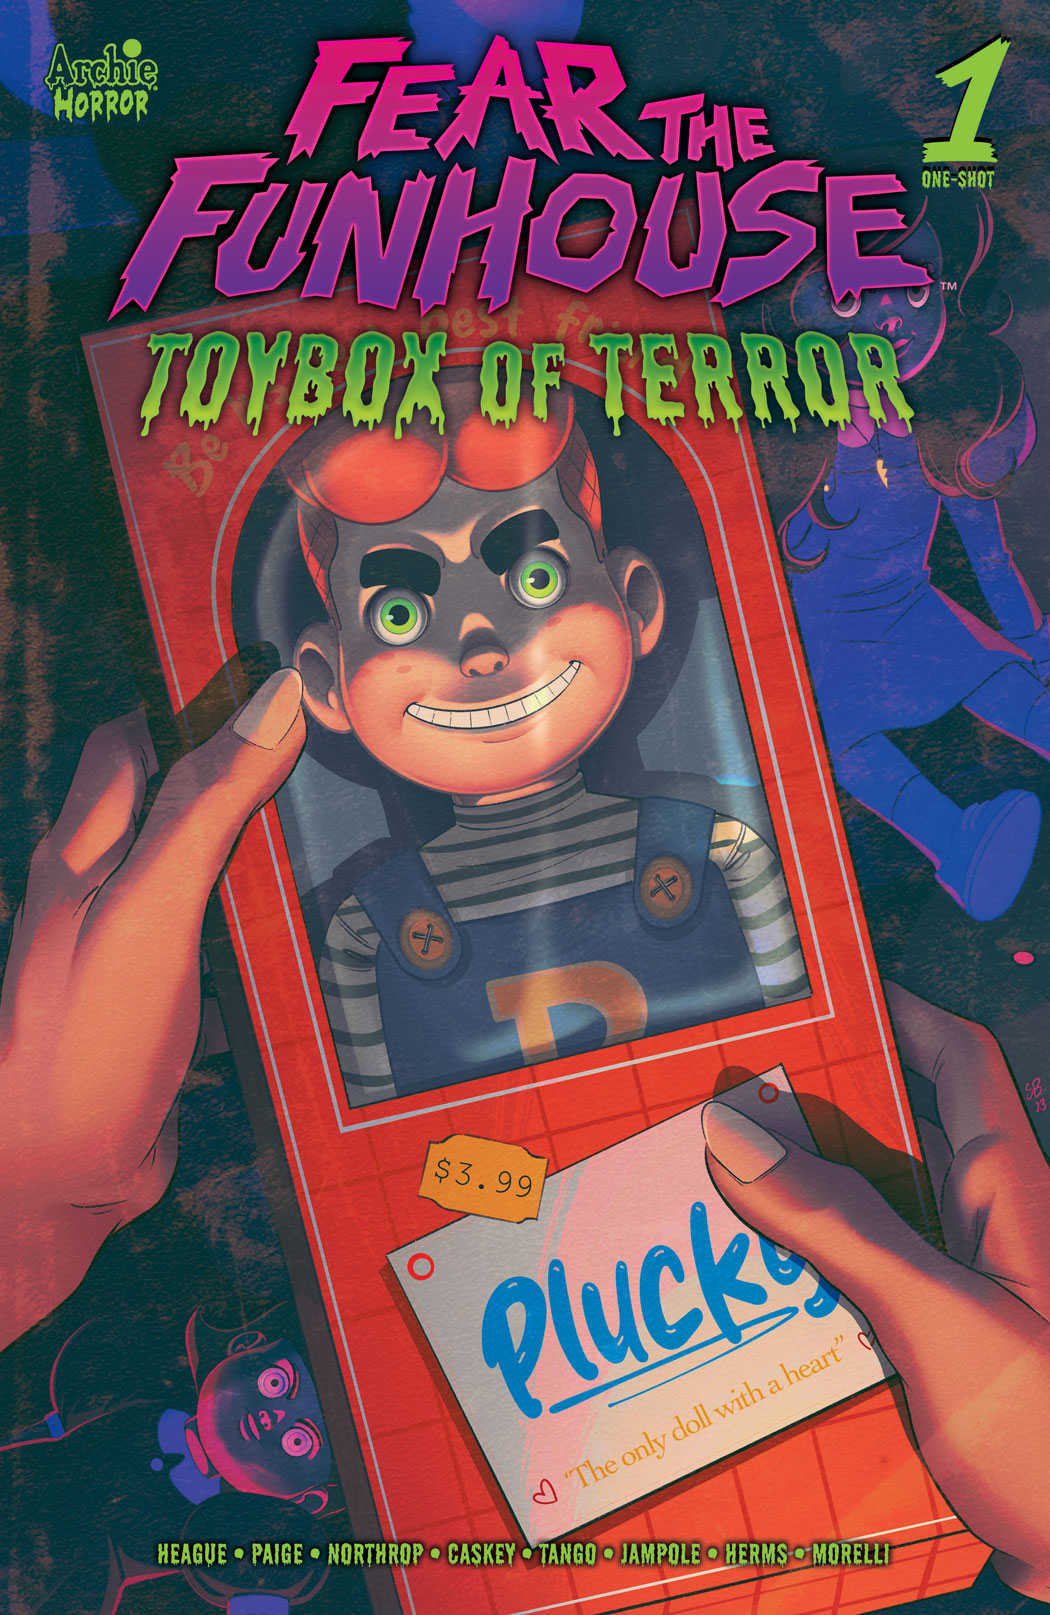 Fear the Funhouse Presents: Toybox of Terror Variant cover by Sweeney Boo. A doll in the style of Chucky that looks like Archie is in a plastic box that reads "Plucky."